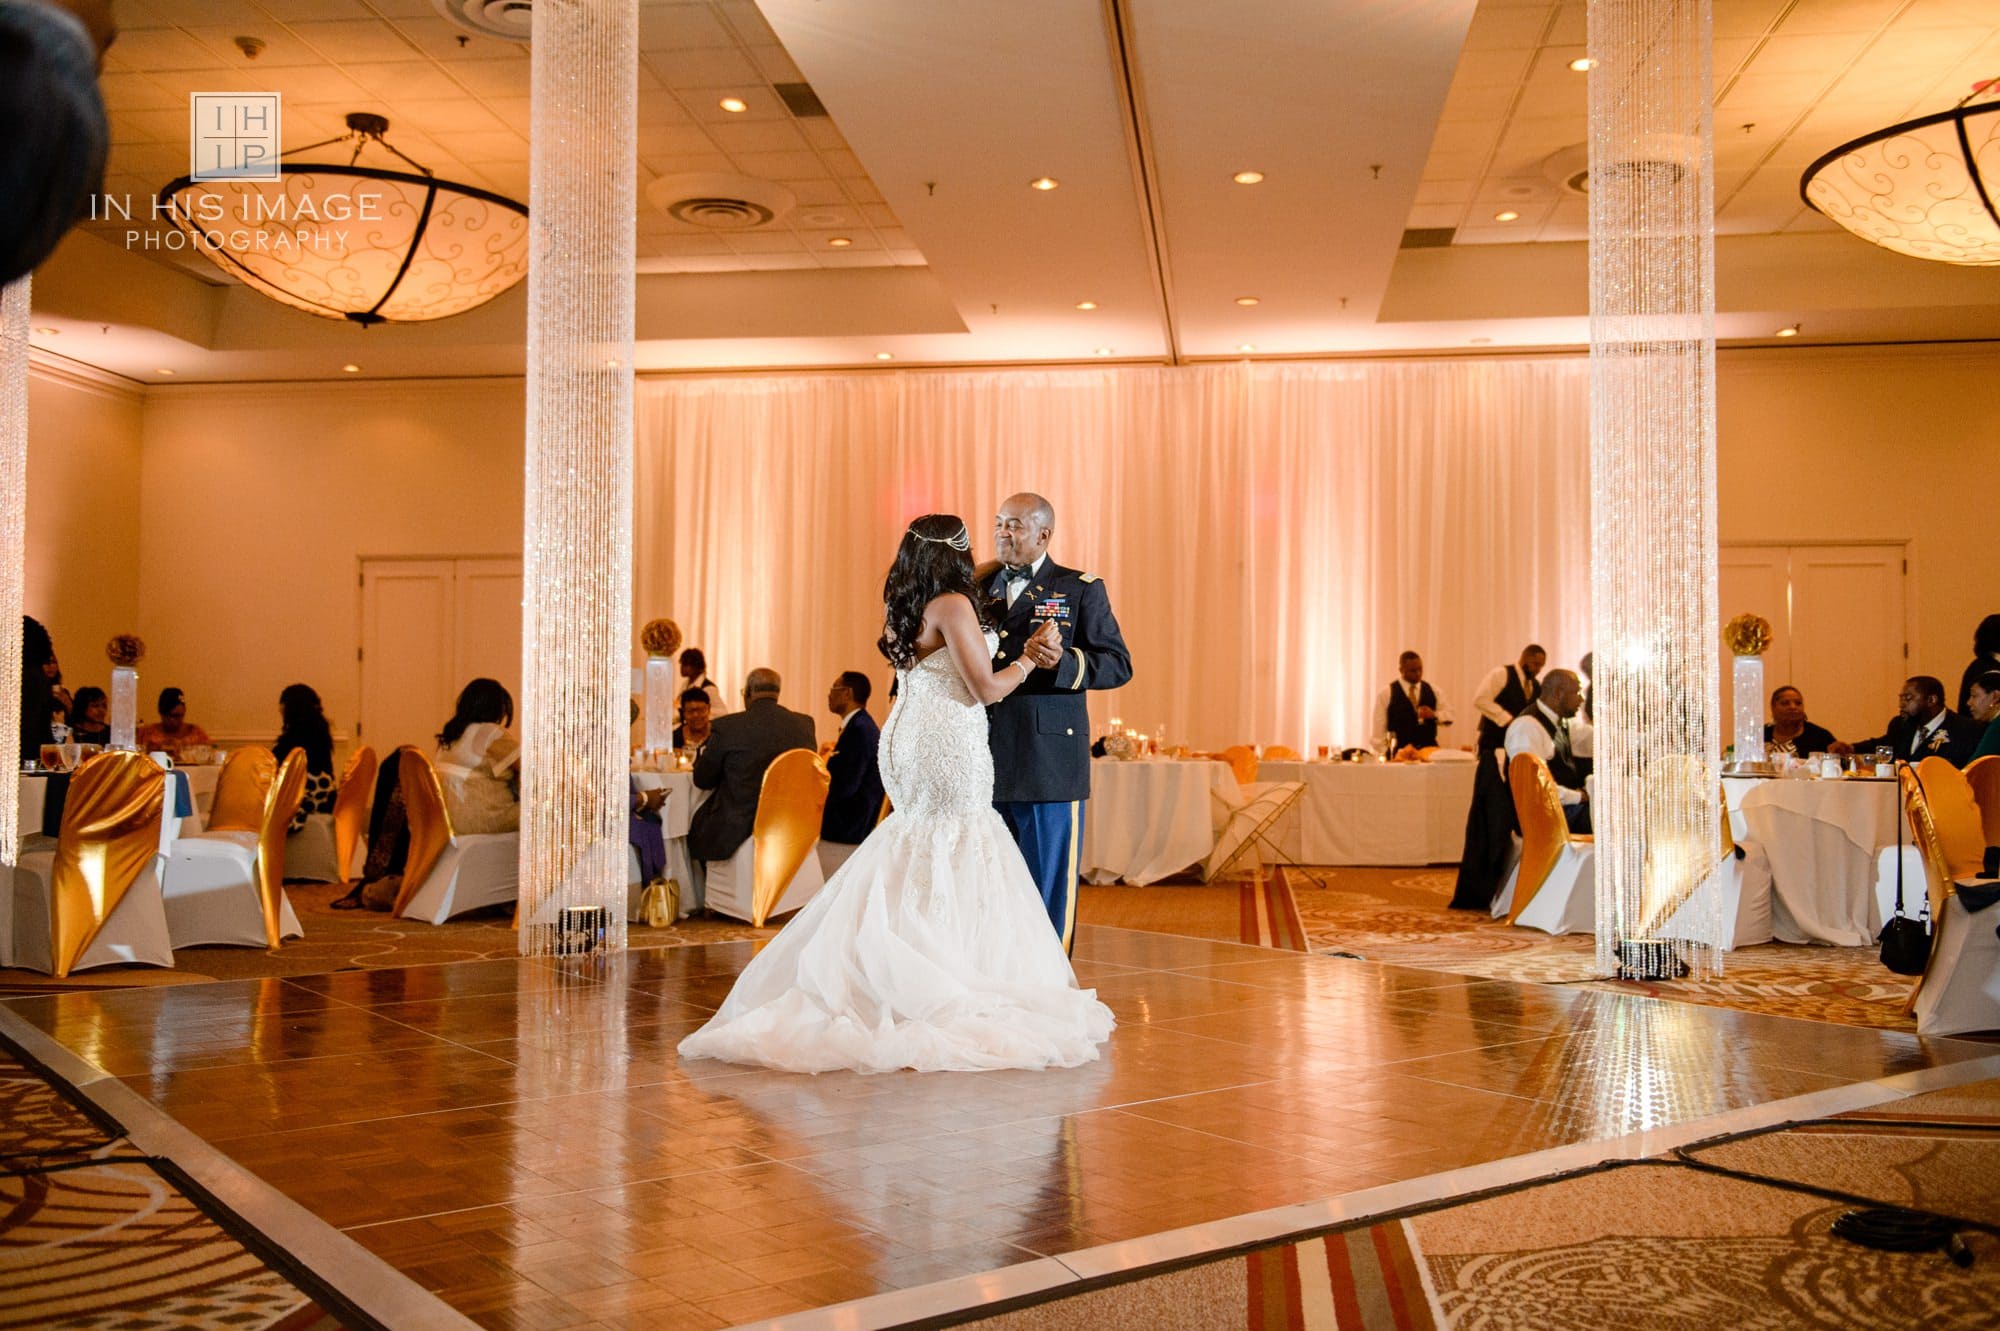 Sheraton Raleigh Hotel father daughter dance 